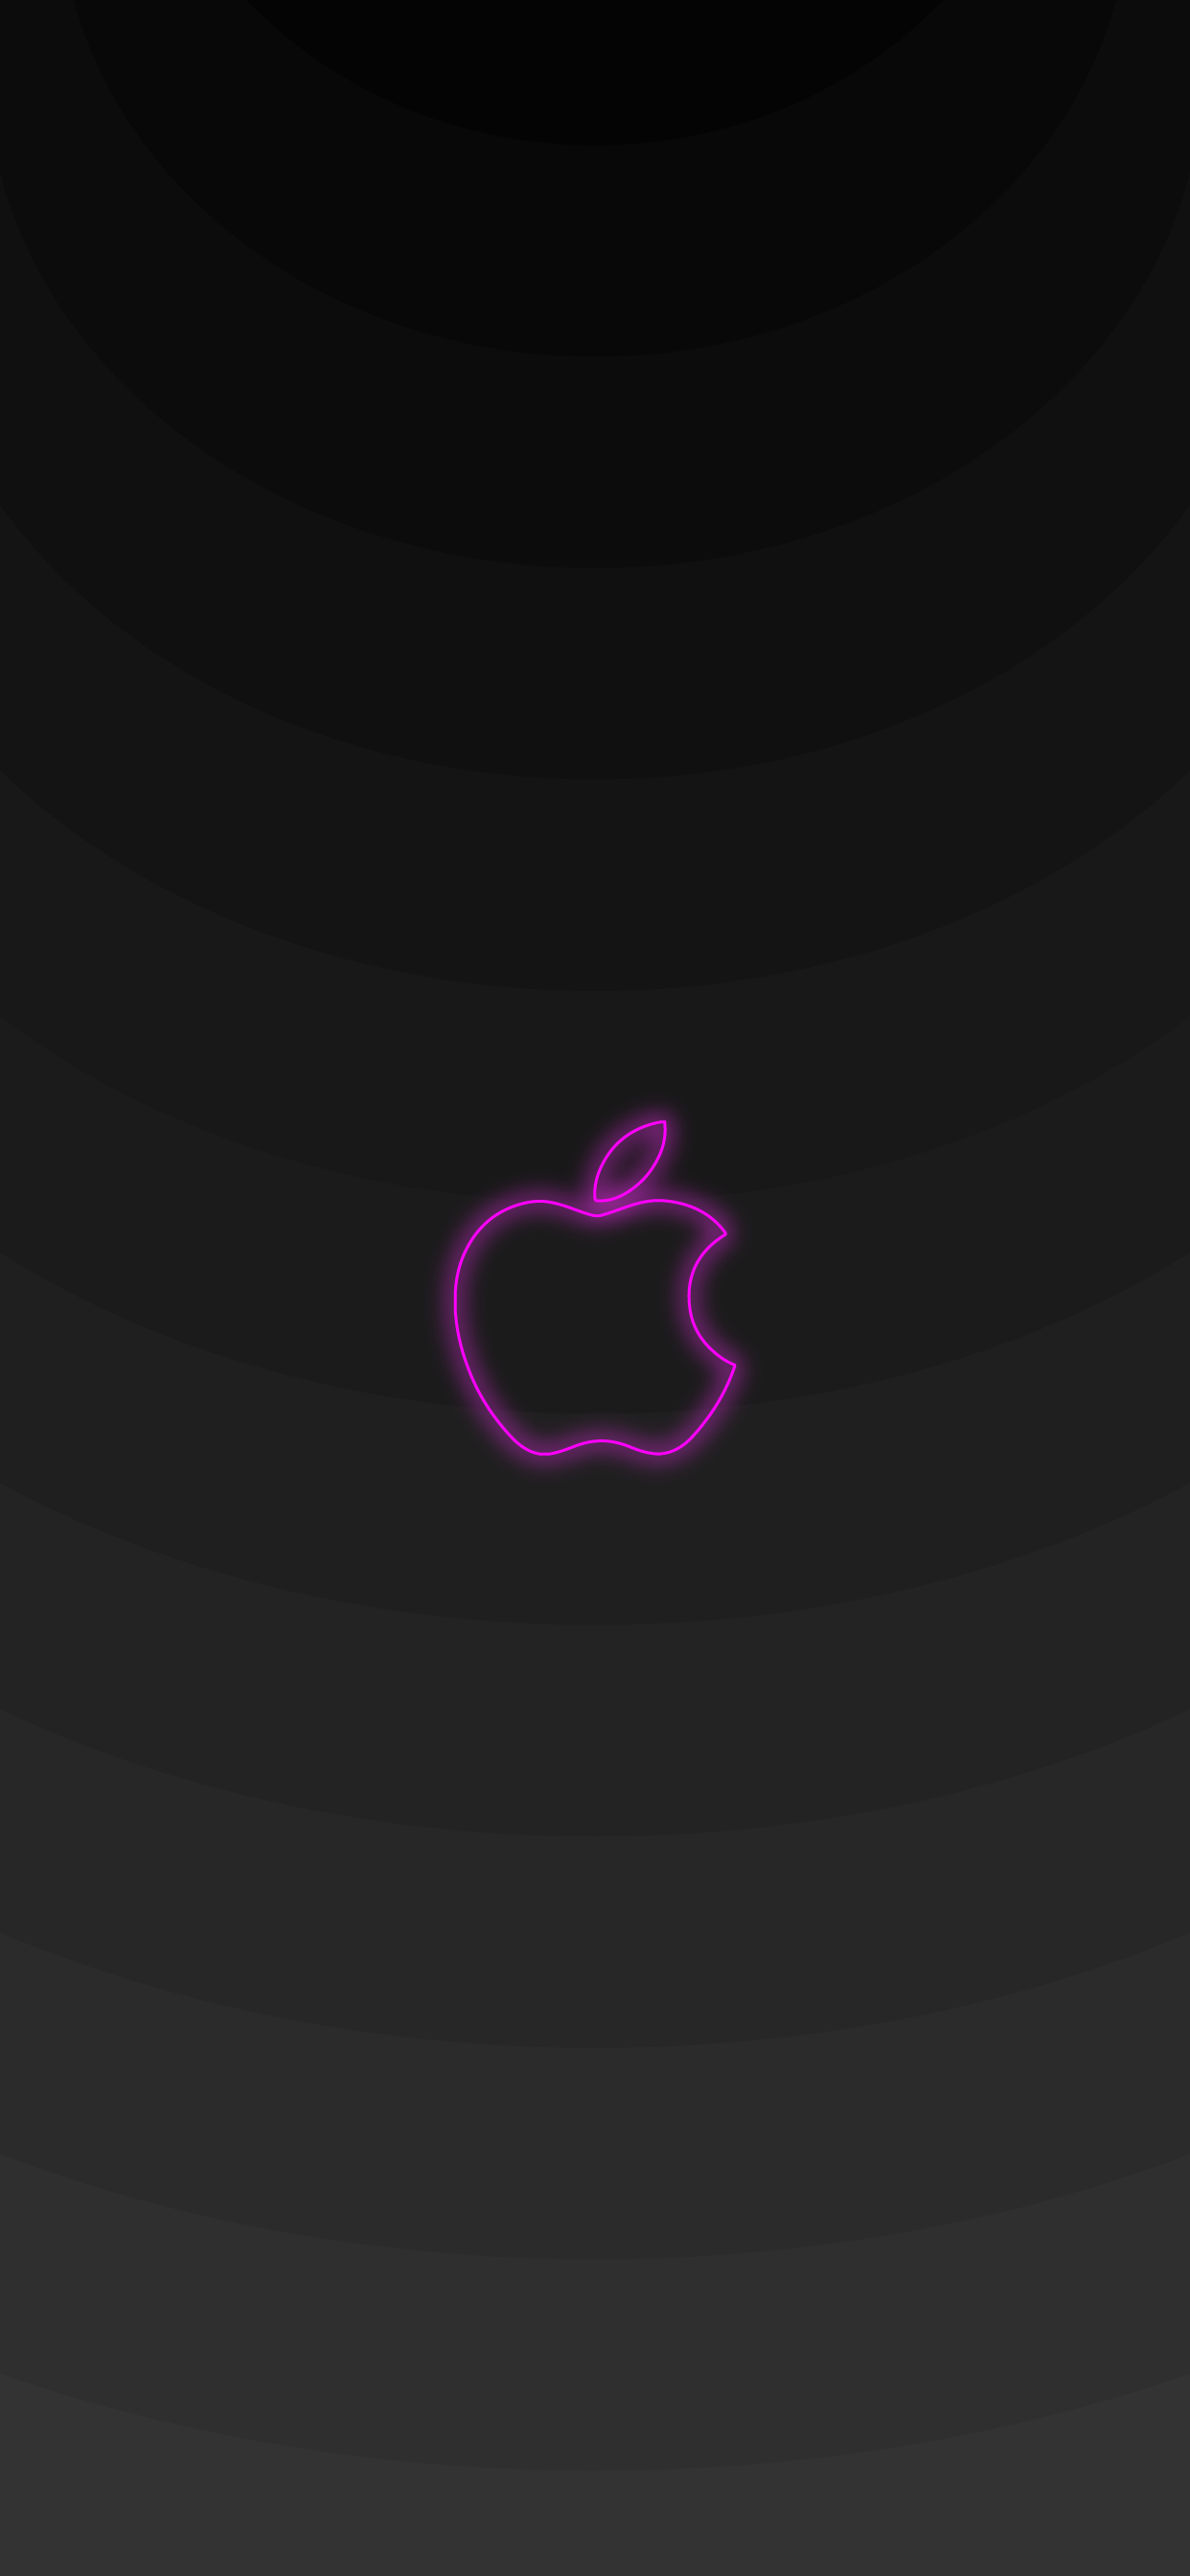 COOL IPHONE APPLE LOGO WALLPAPERS